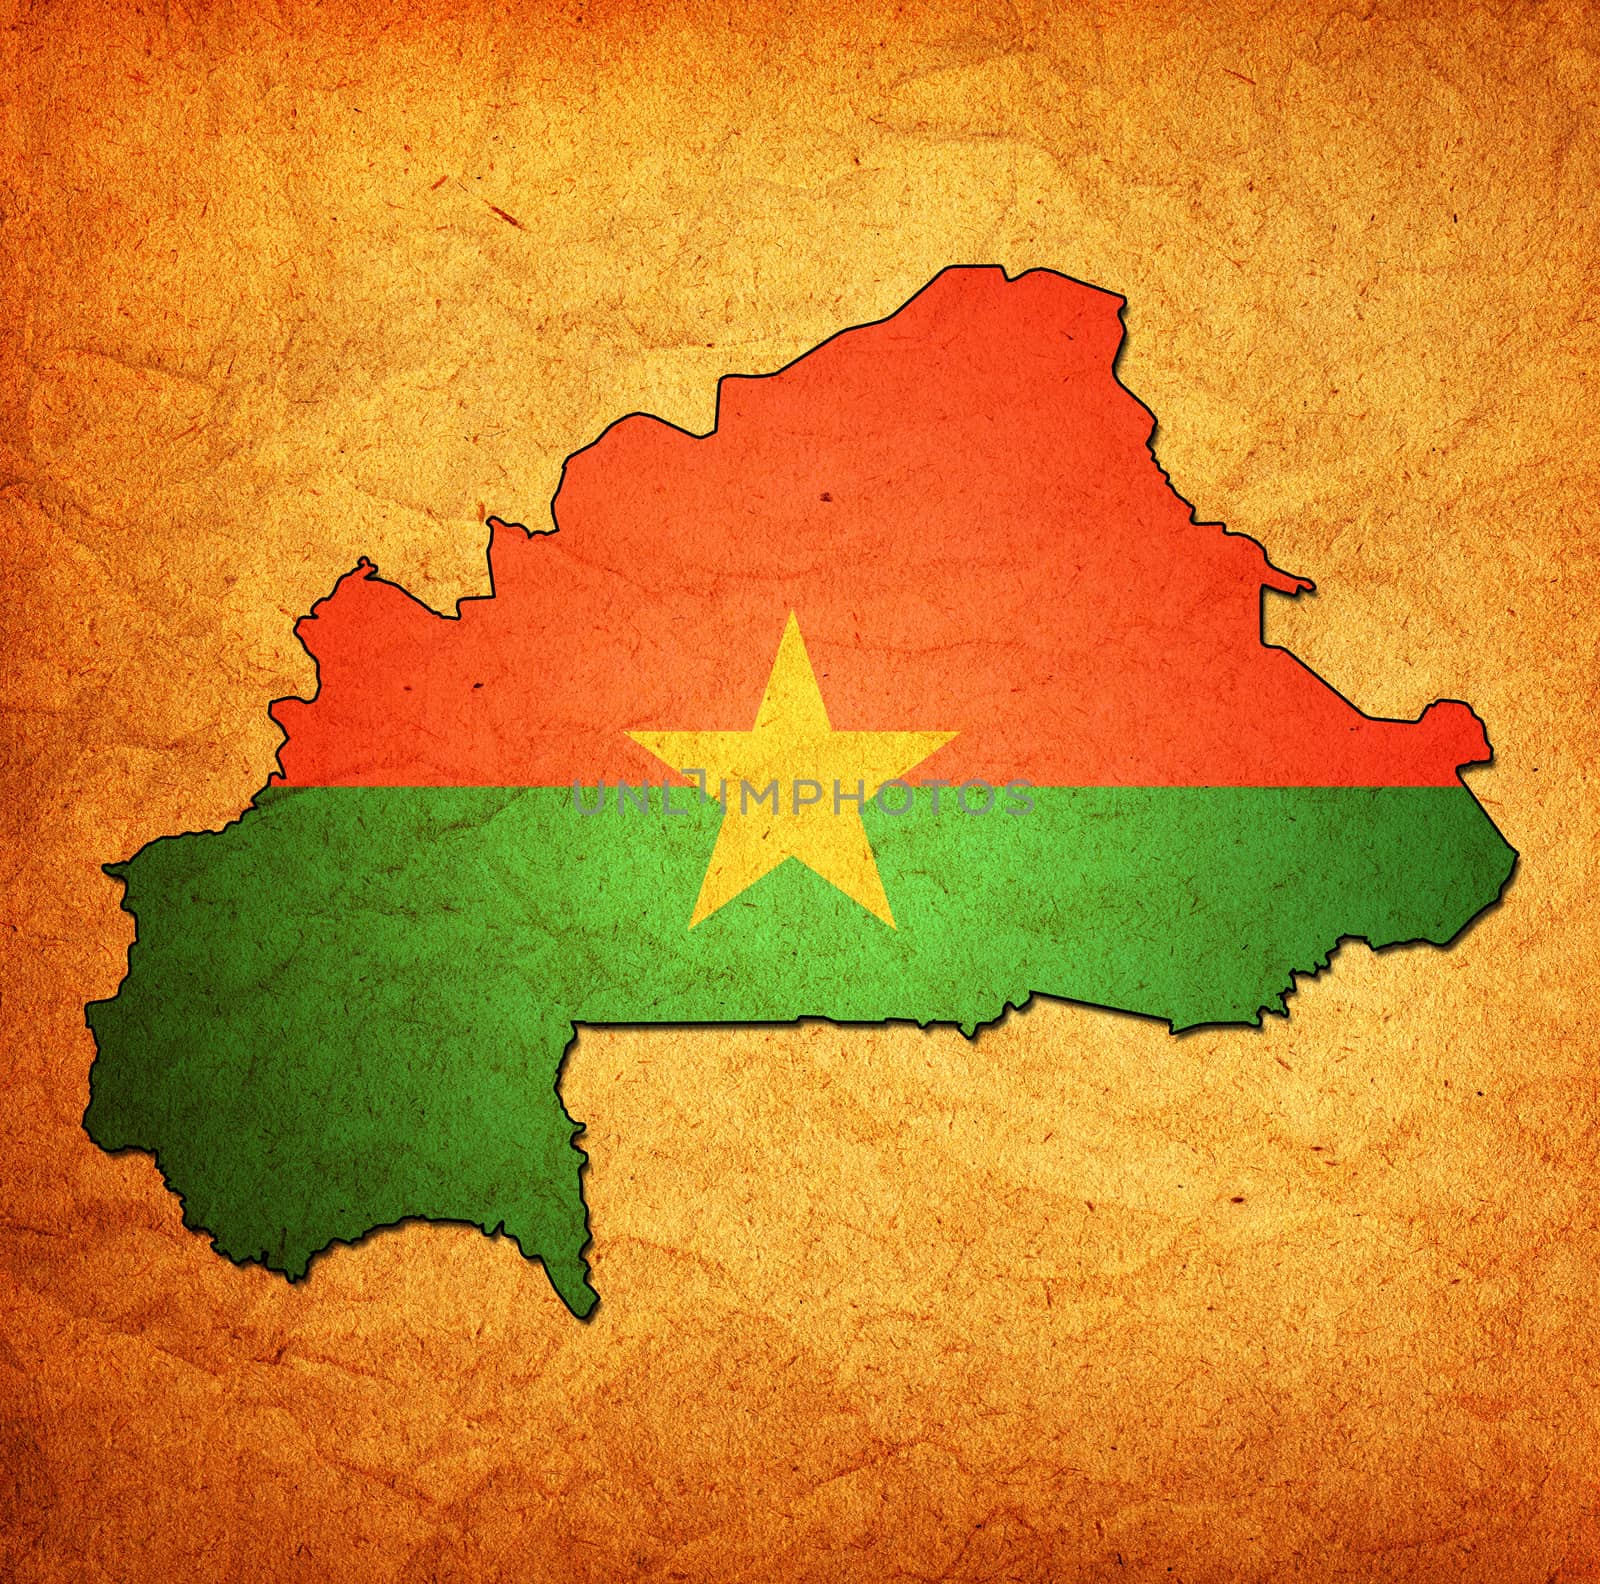 burkina faso territory with flag by michal812